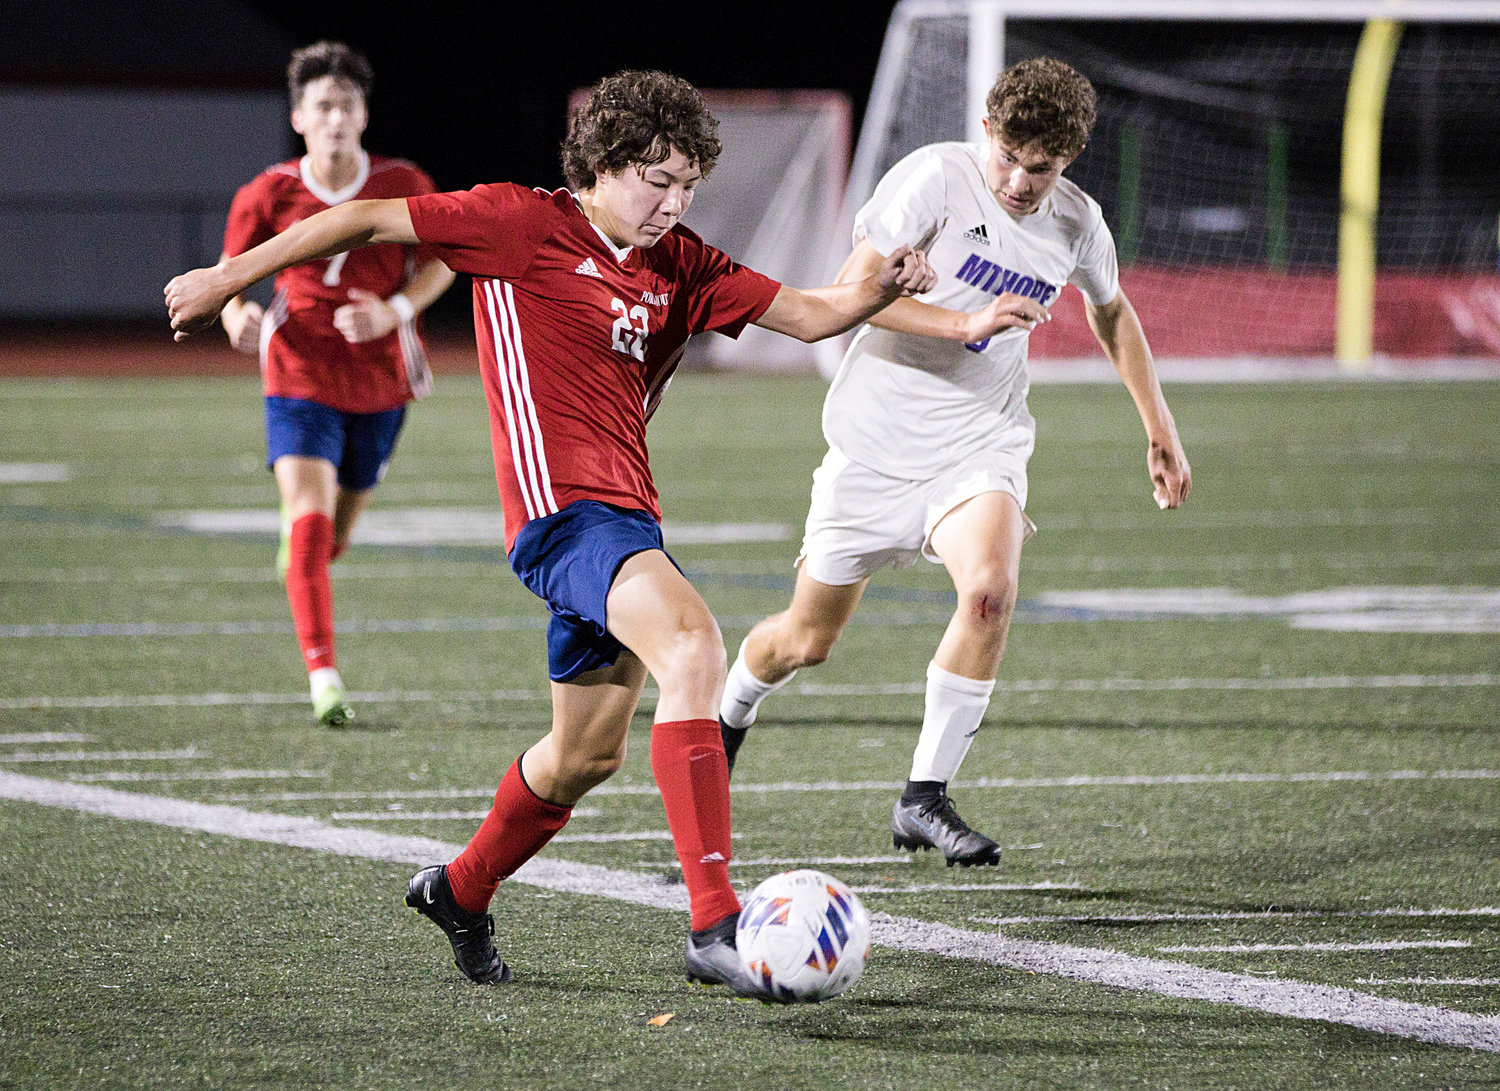 Aidan Chen races the ball past Mt. Hope opponents.